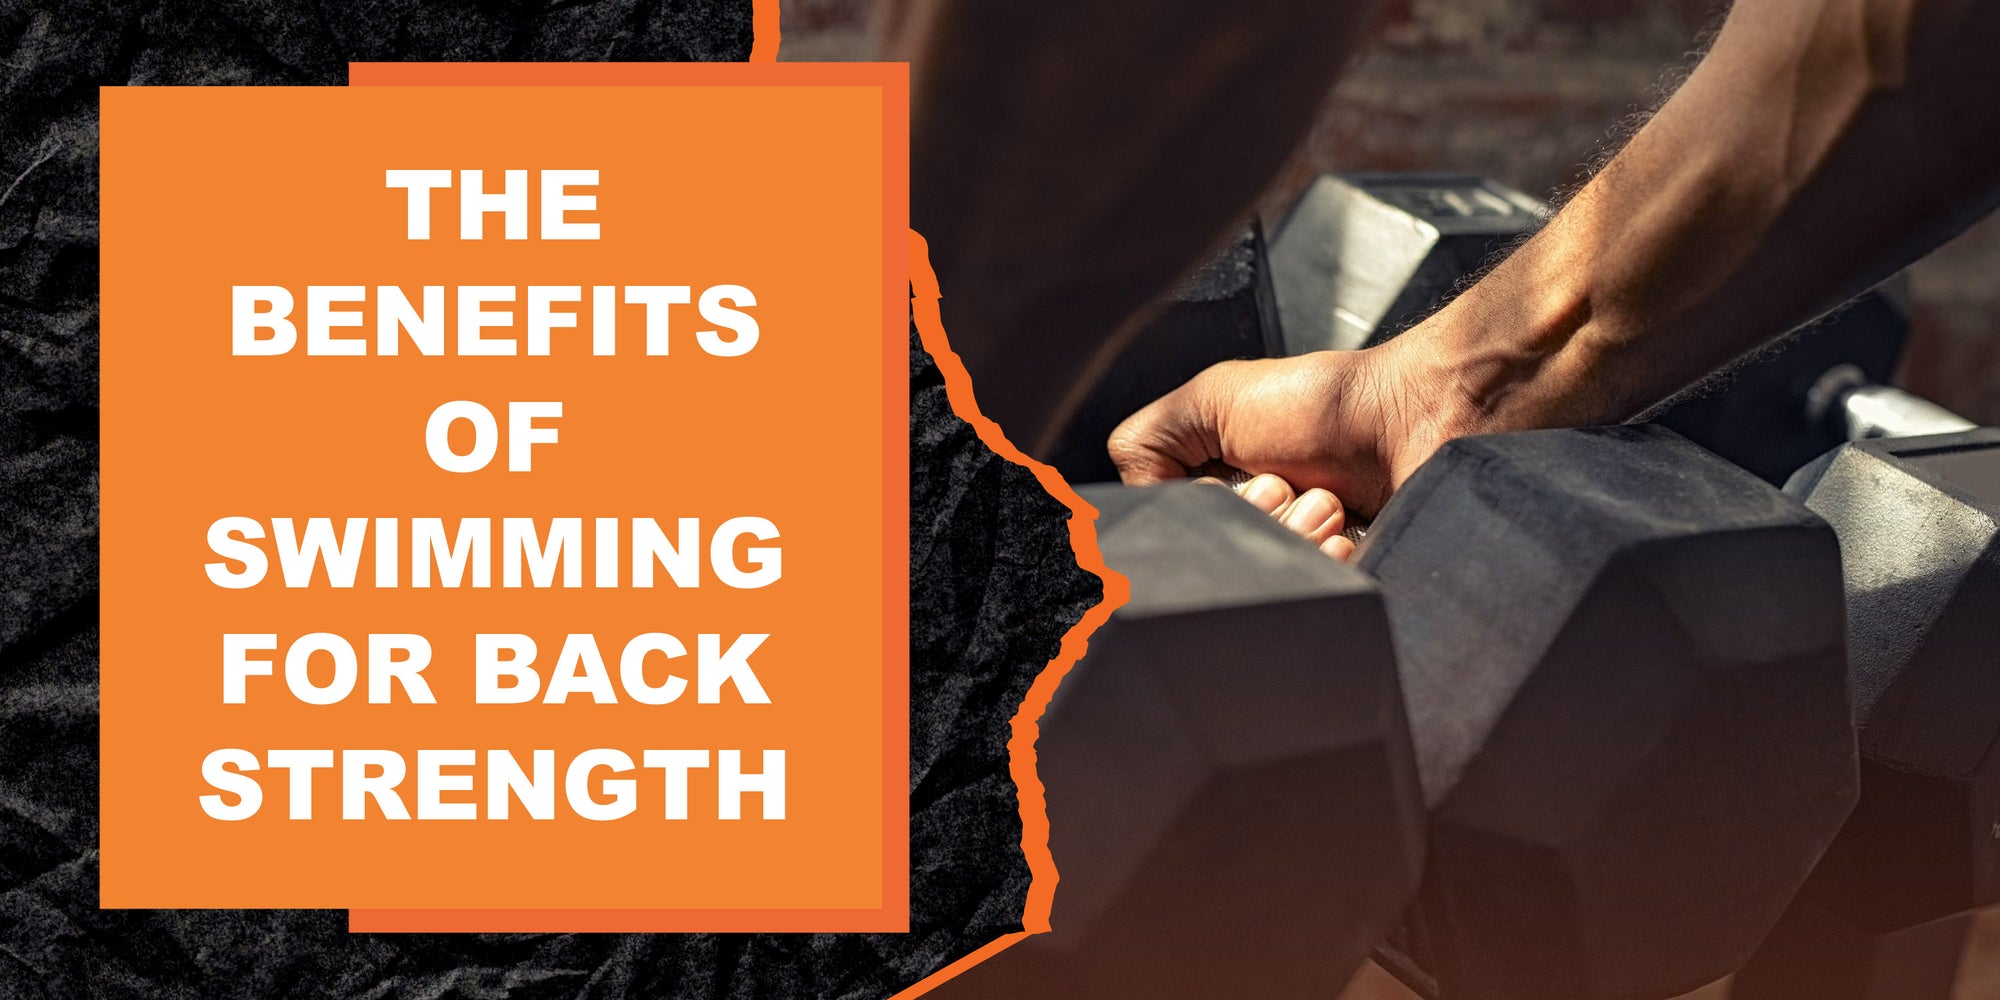 The Benefits of Swimming for Back Strength